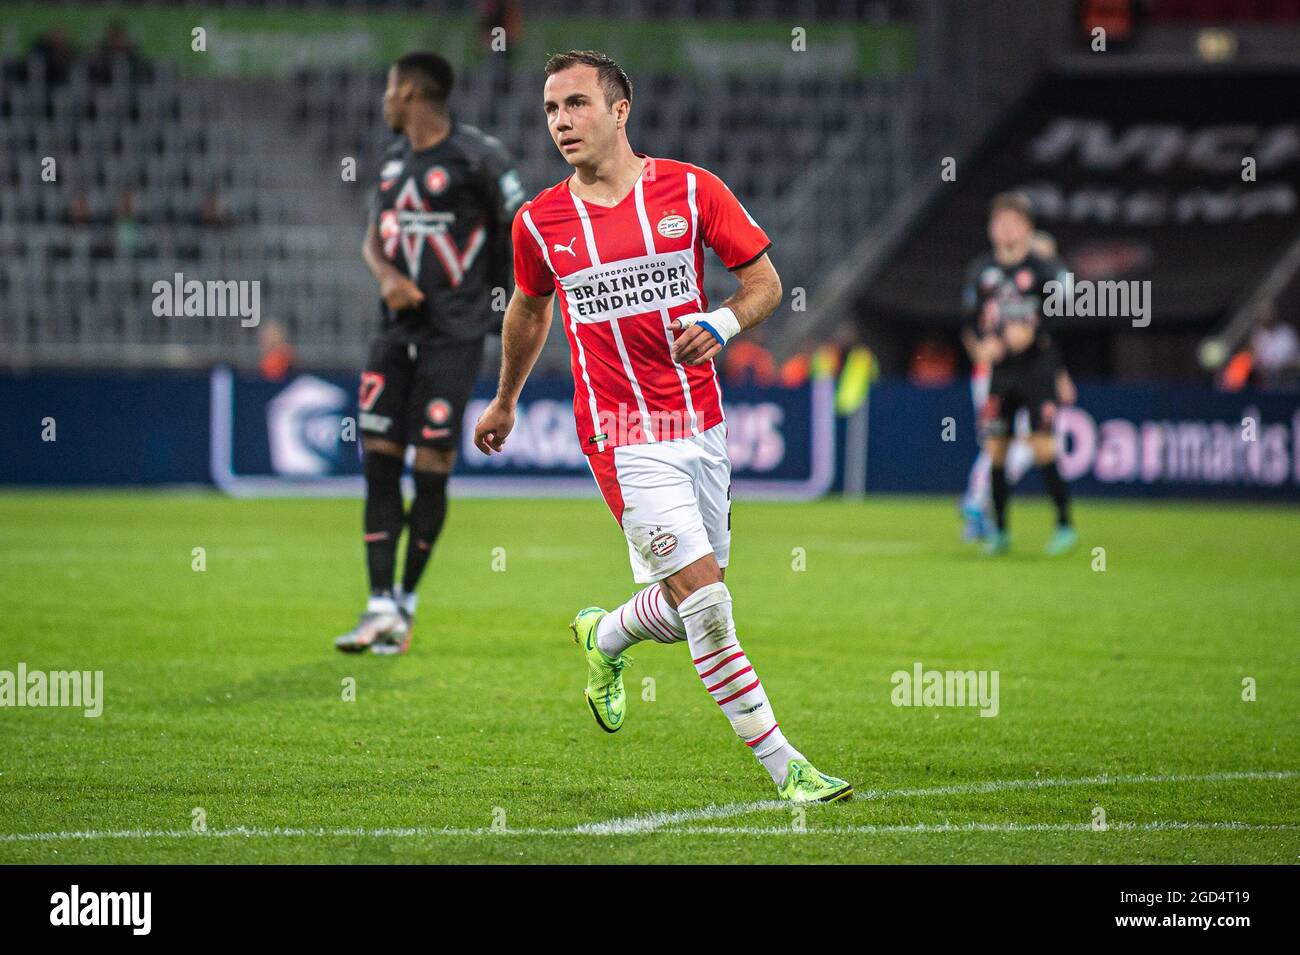 Herning, Denmark. 10th Aug, 2021. Mario Götze (27) of PSV Eindhoven seen during the UEFA Champions League qualification match between FC Midtjylland and PSV Eindhoven at MCH Arena in Herning. (Photo Credit: Gonzales Photo/Alamy Live News Stock Photo